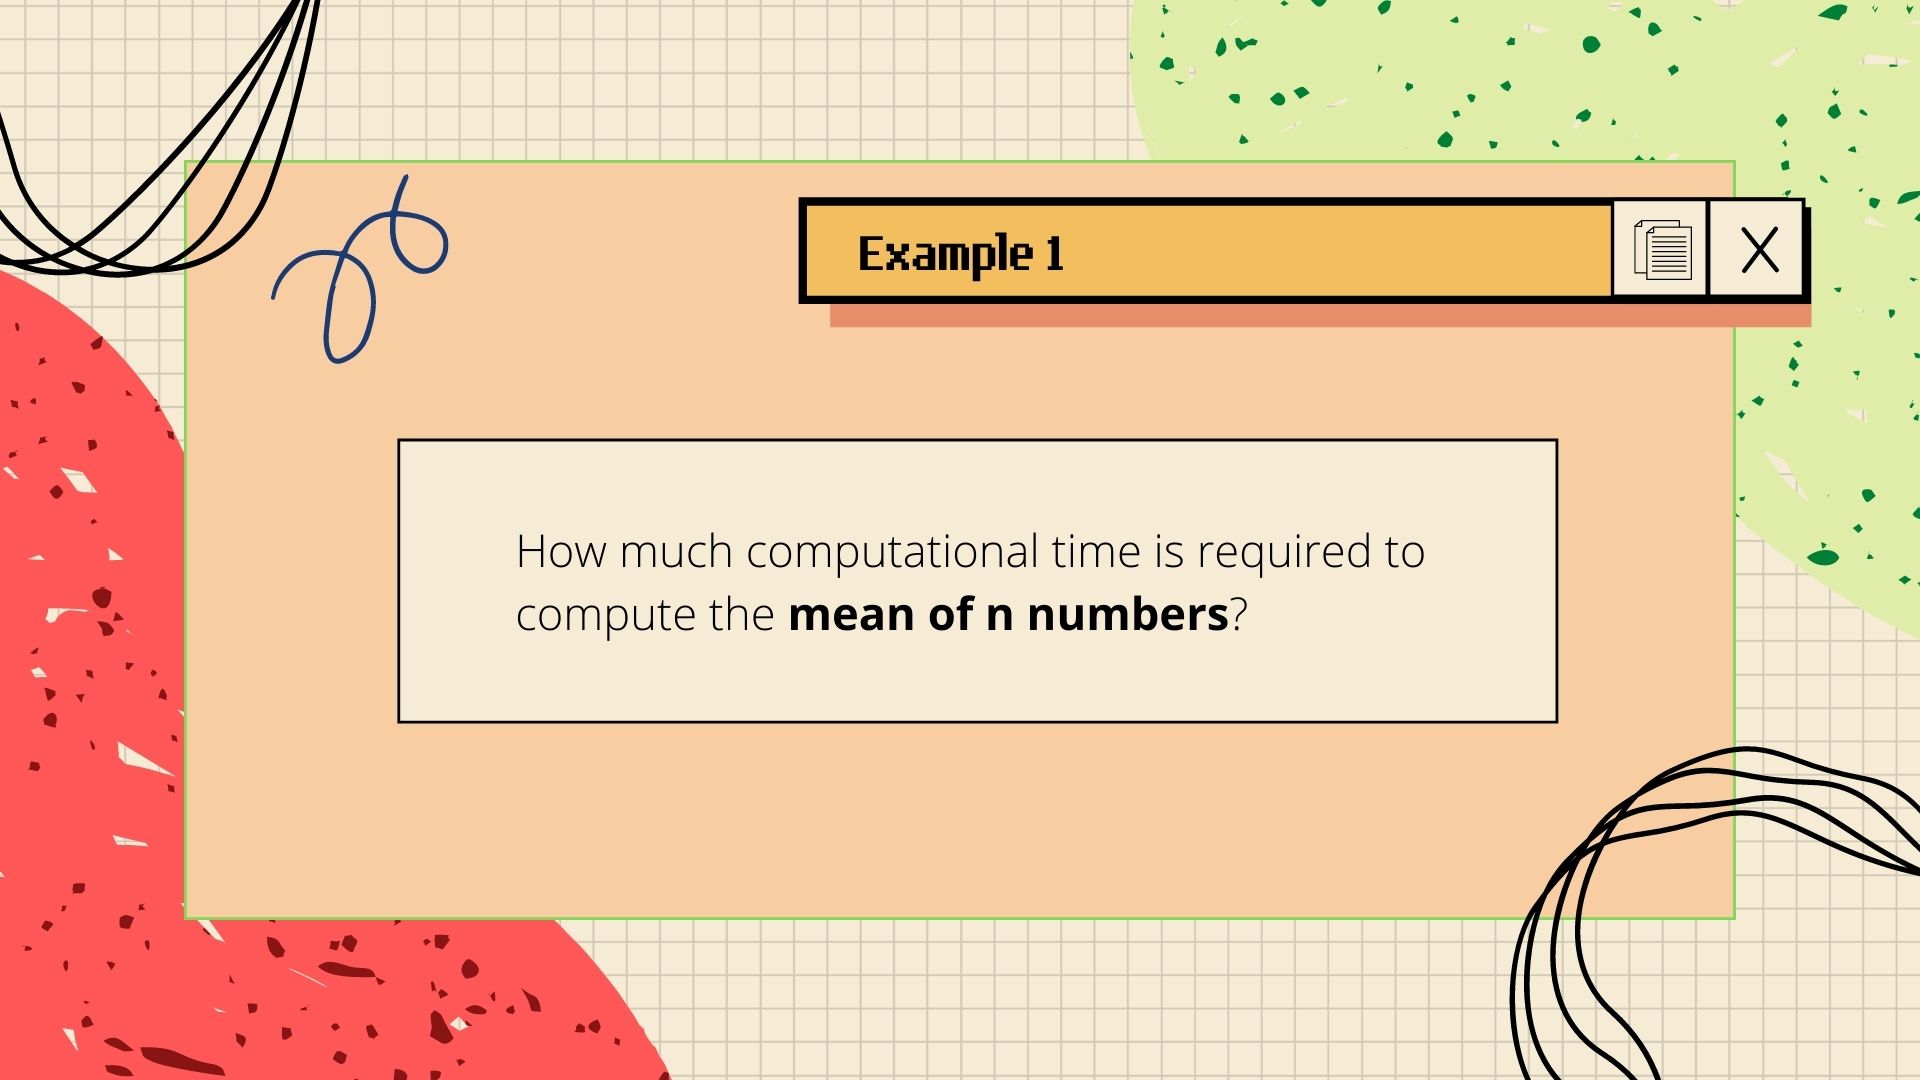 Example 1: Computational time to compute the mean